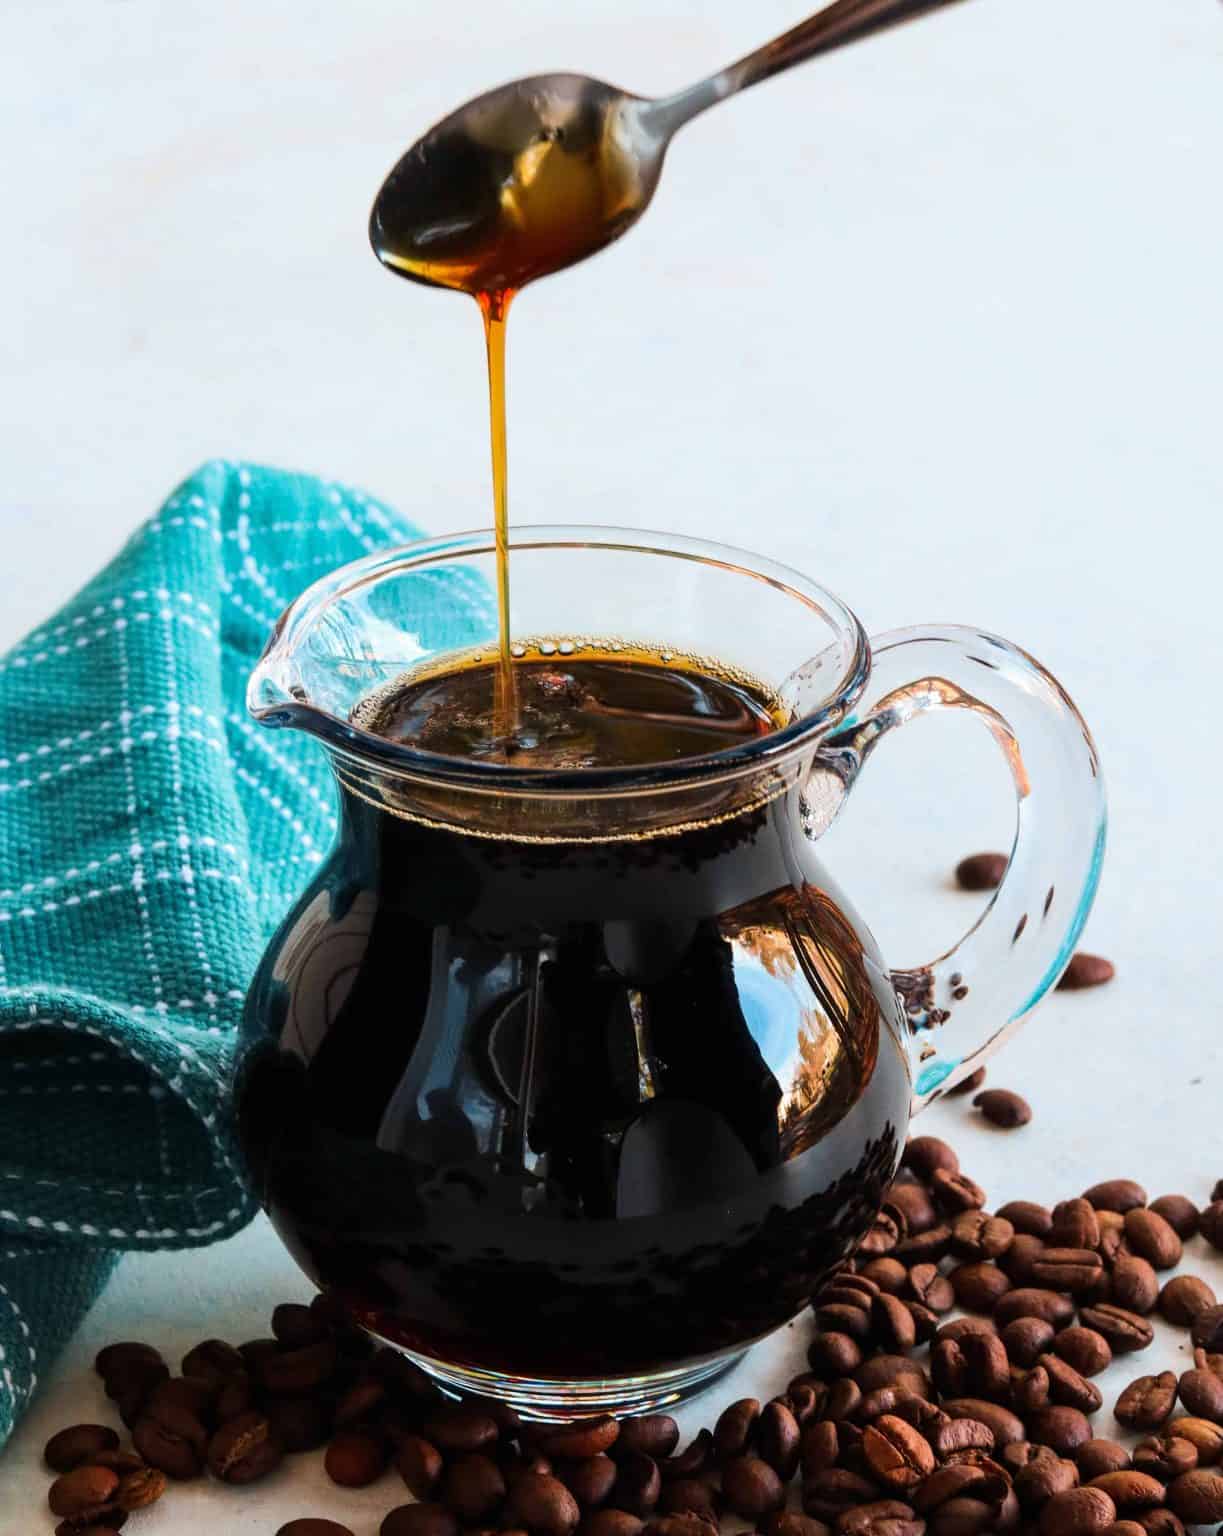 Coffee-Flavored Syrup Recipe &amp; Things To Do With Coffee- Southern Plate